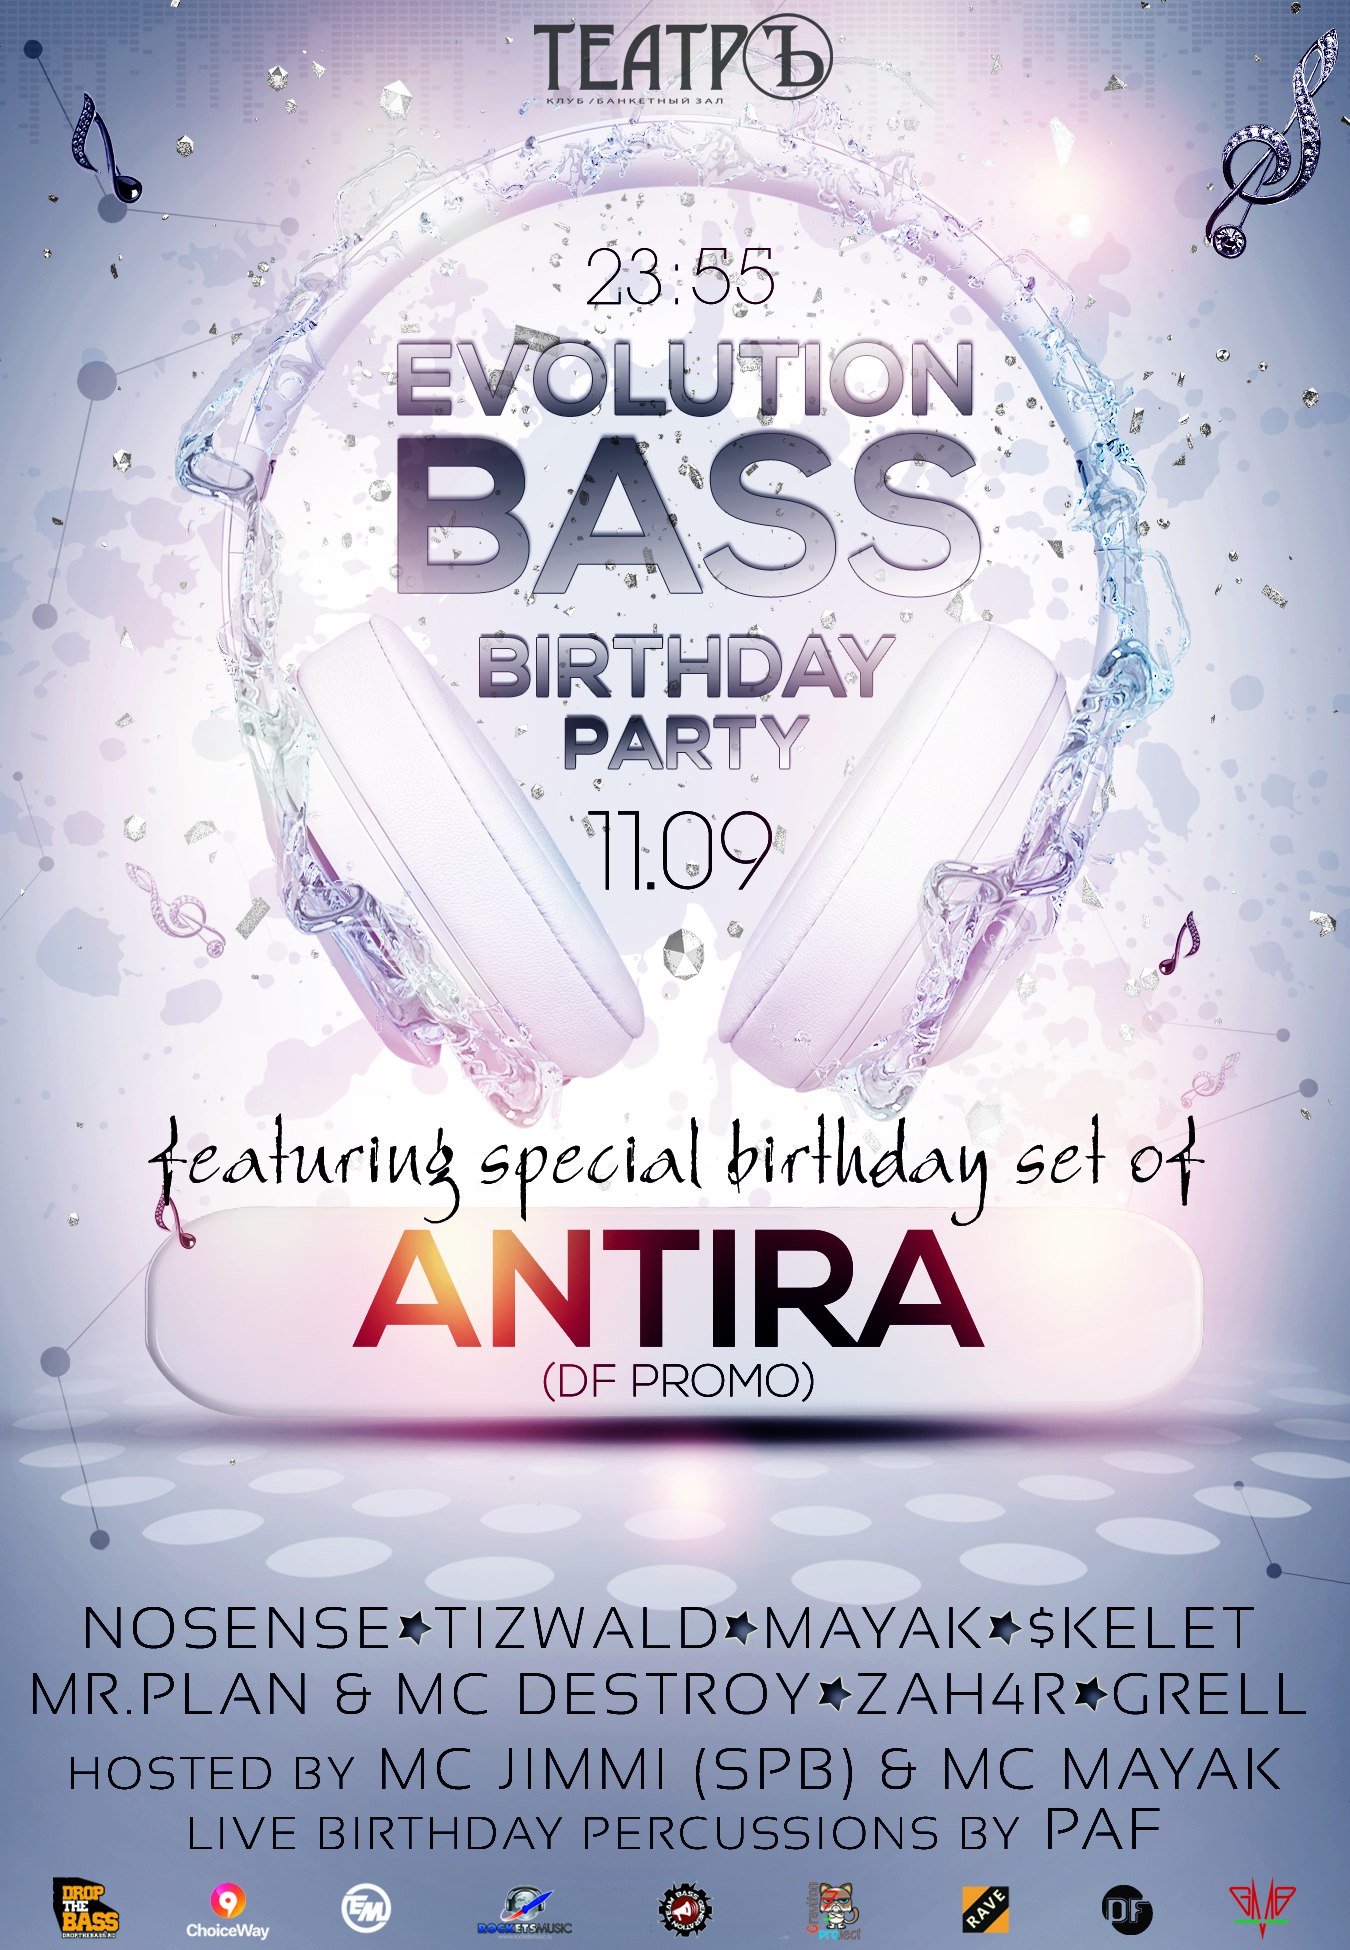 Вечеринка Drum Bass афиша. Four Bass Party. B'Day Party. Bass b-Day. Mr plan